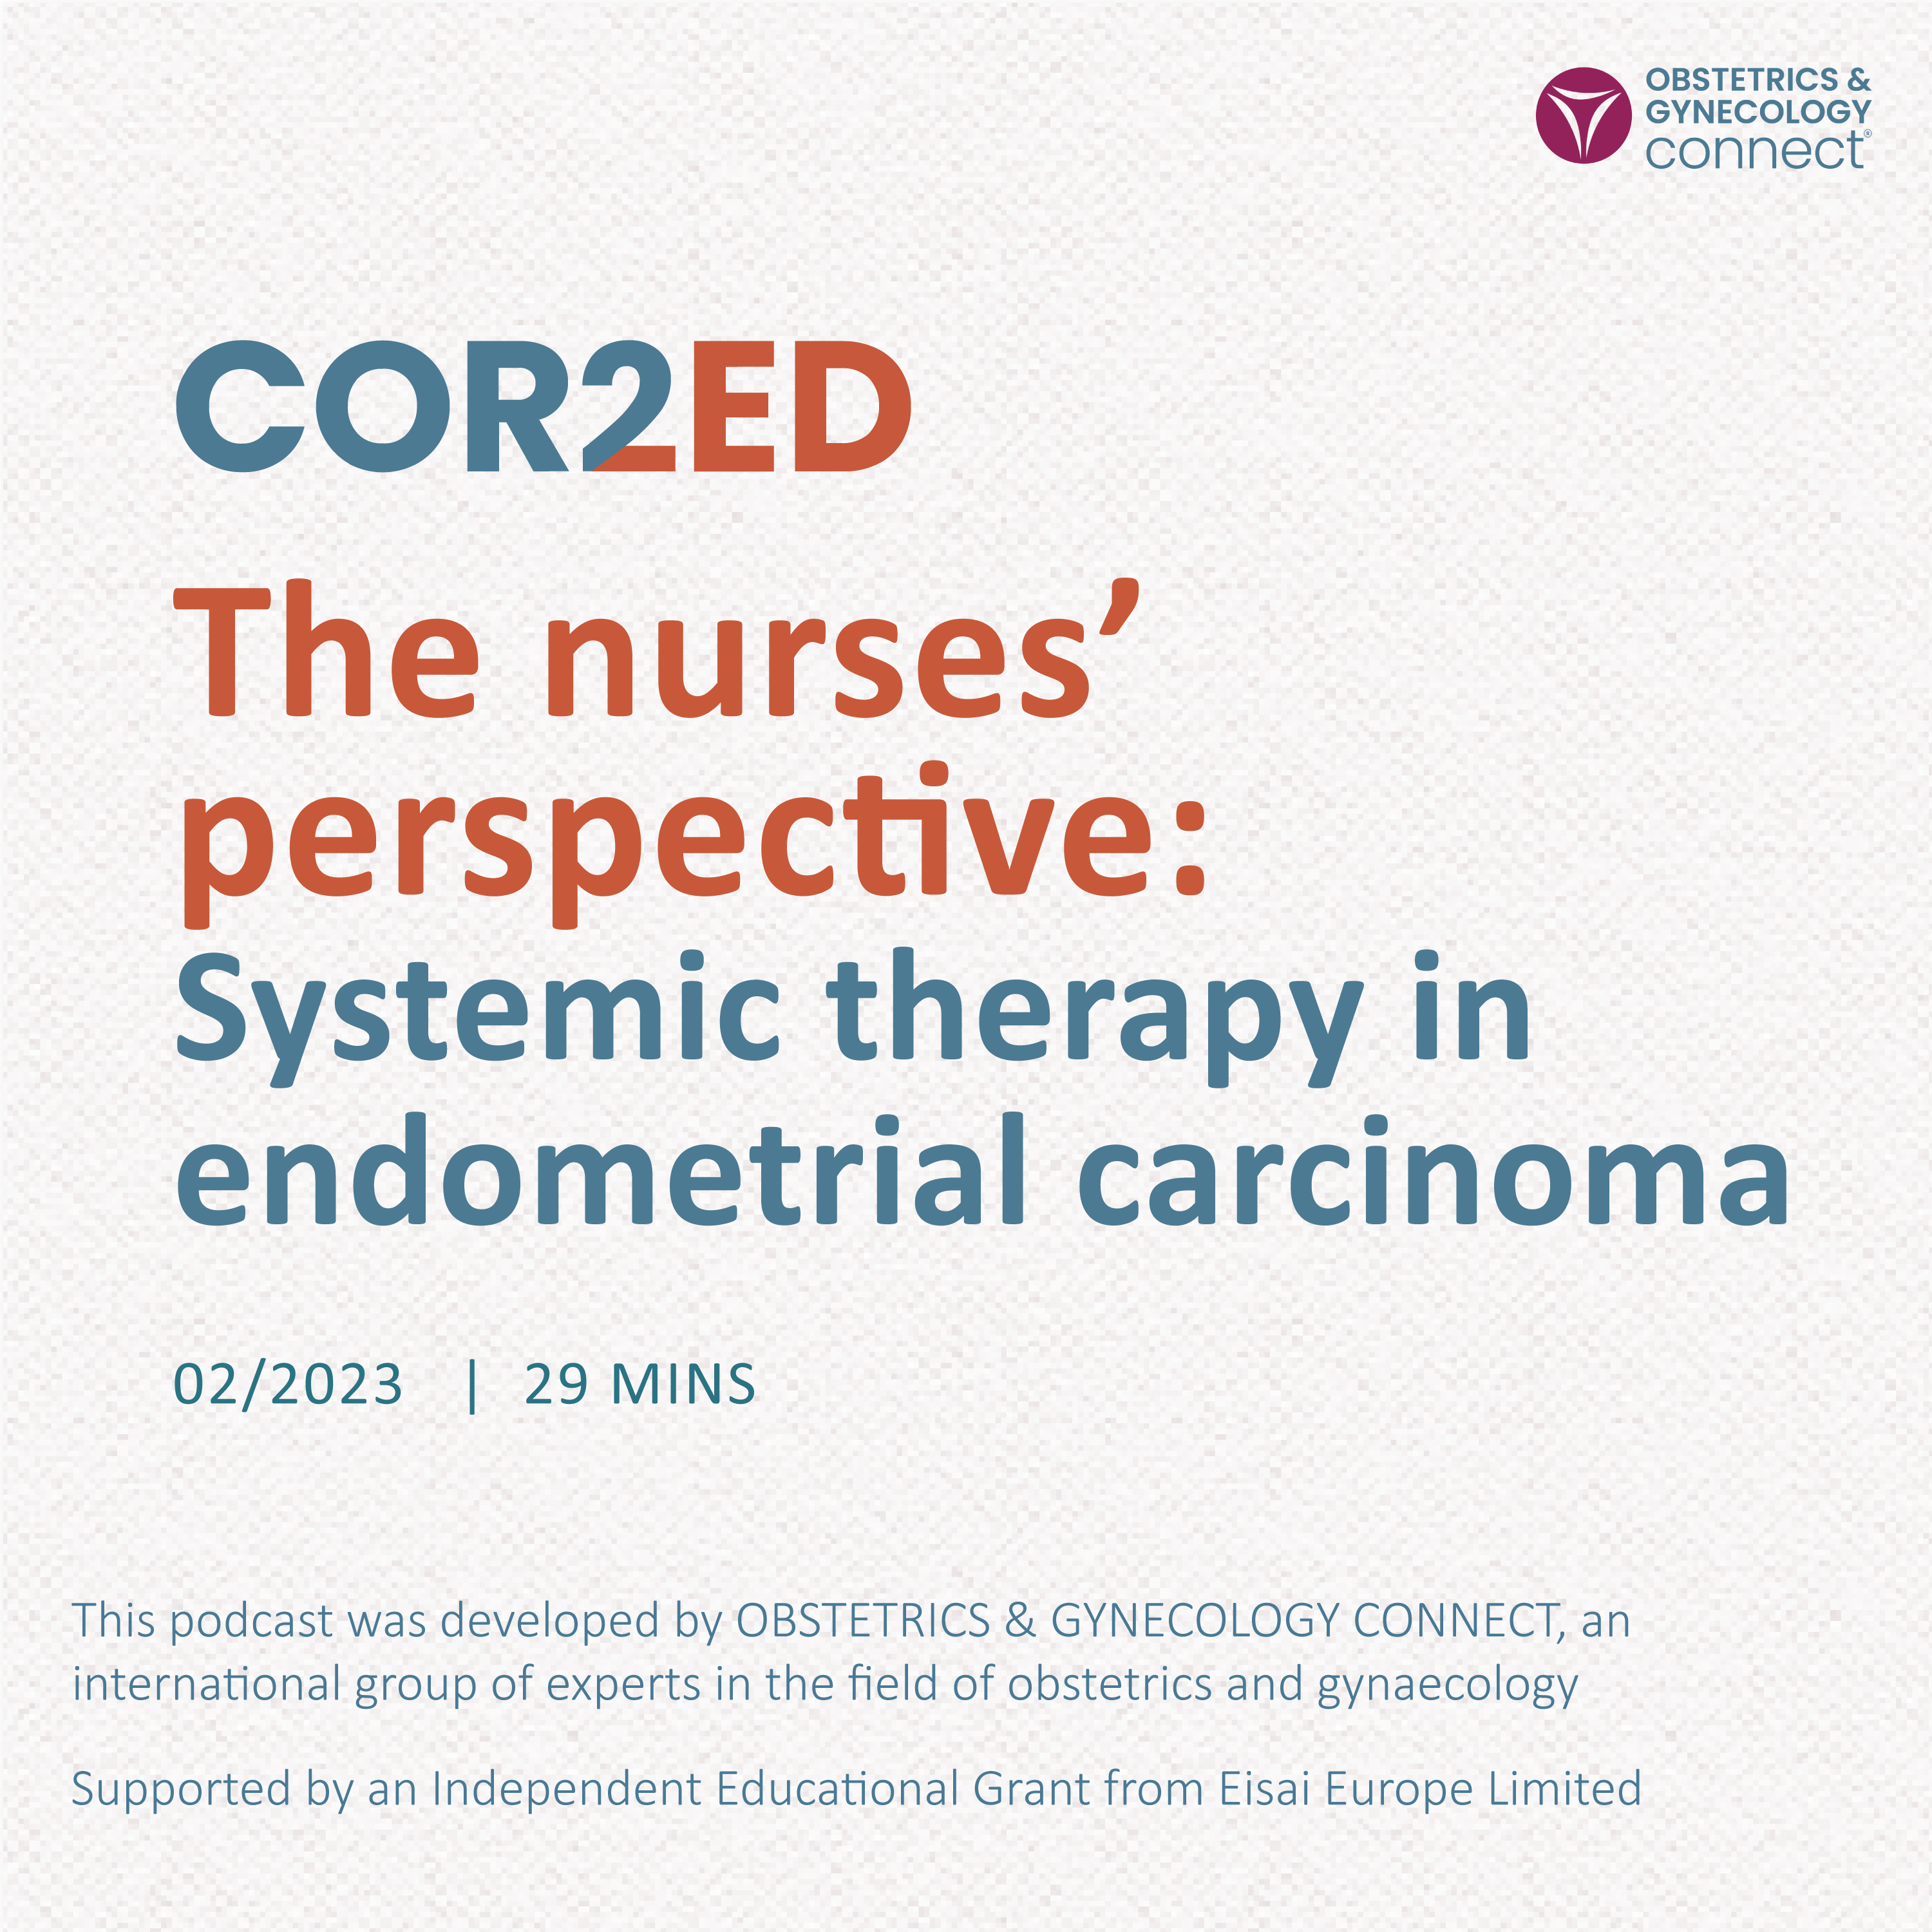 The nurses’ perspective: Systemic therapy in endometrial carcinoma